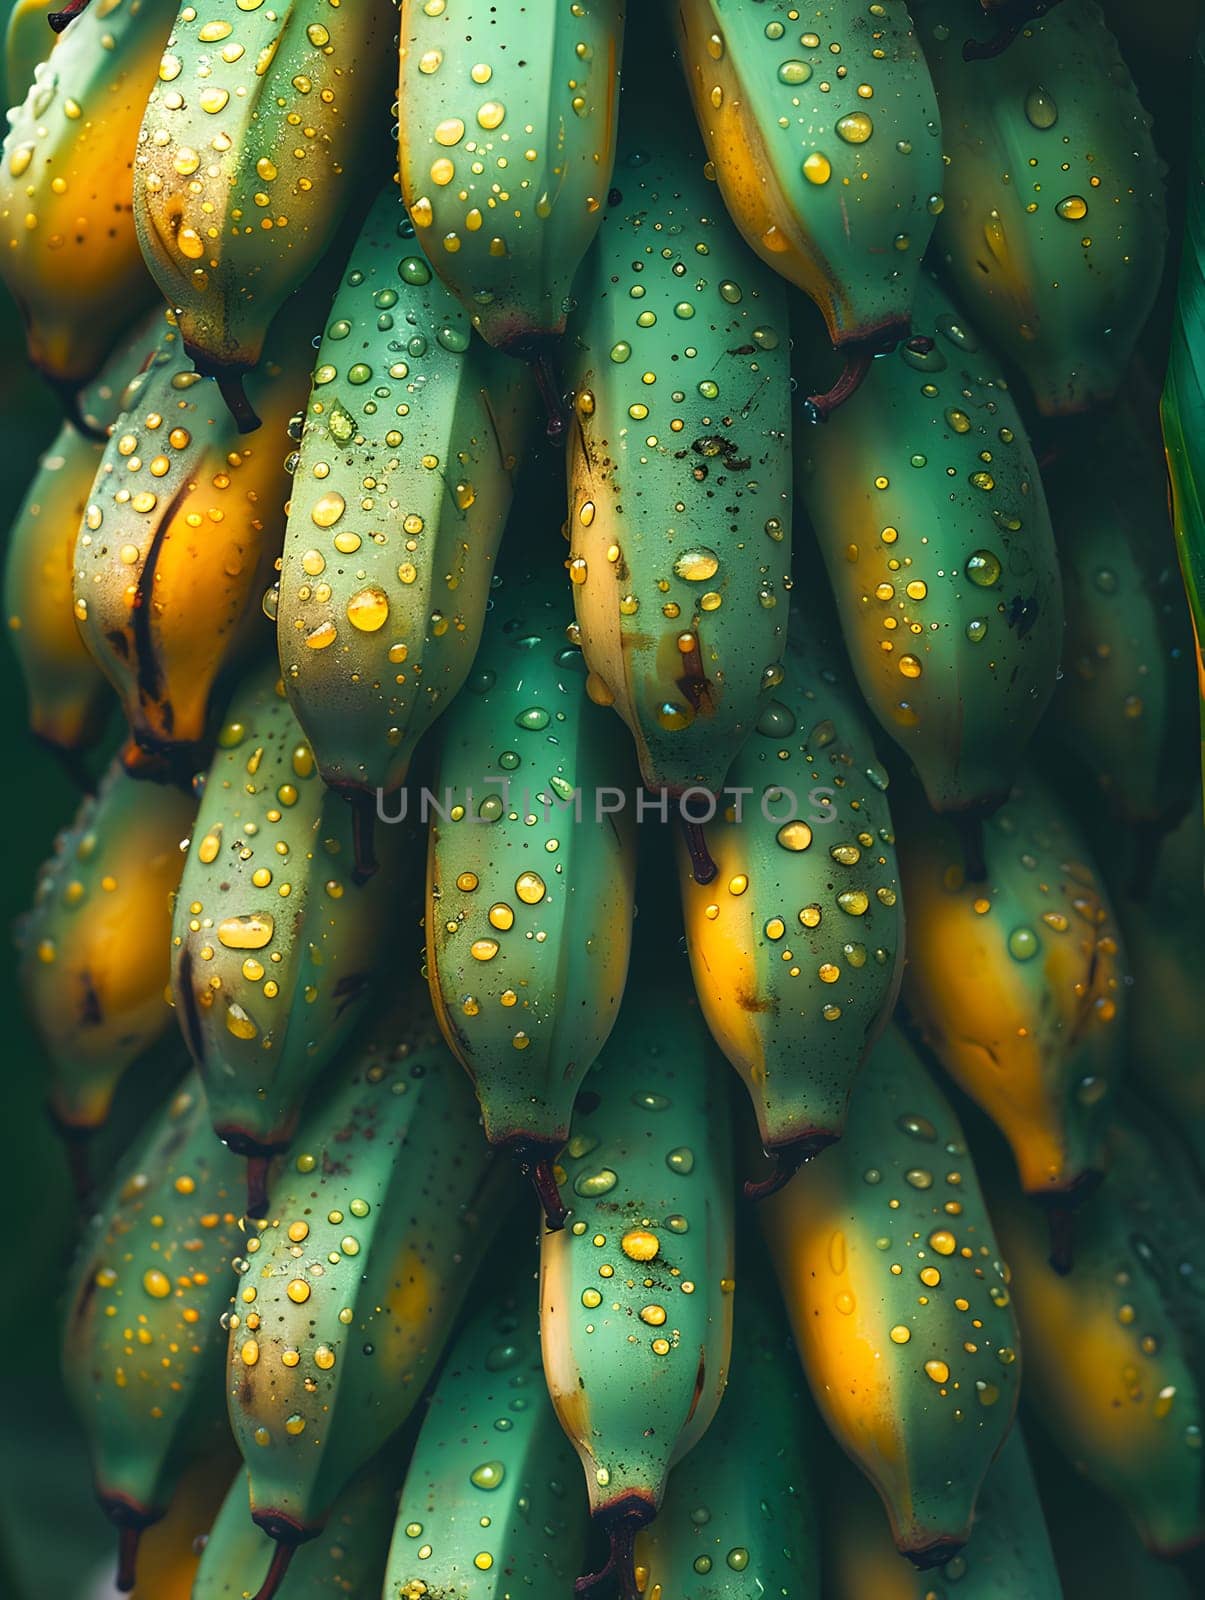 A closeup of a bunch of green and yellow bananas with water drops on them, resembling an underwater marine organism in an azure coral reef, with electric blue hues and aqua tones